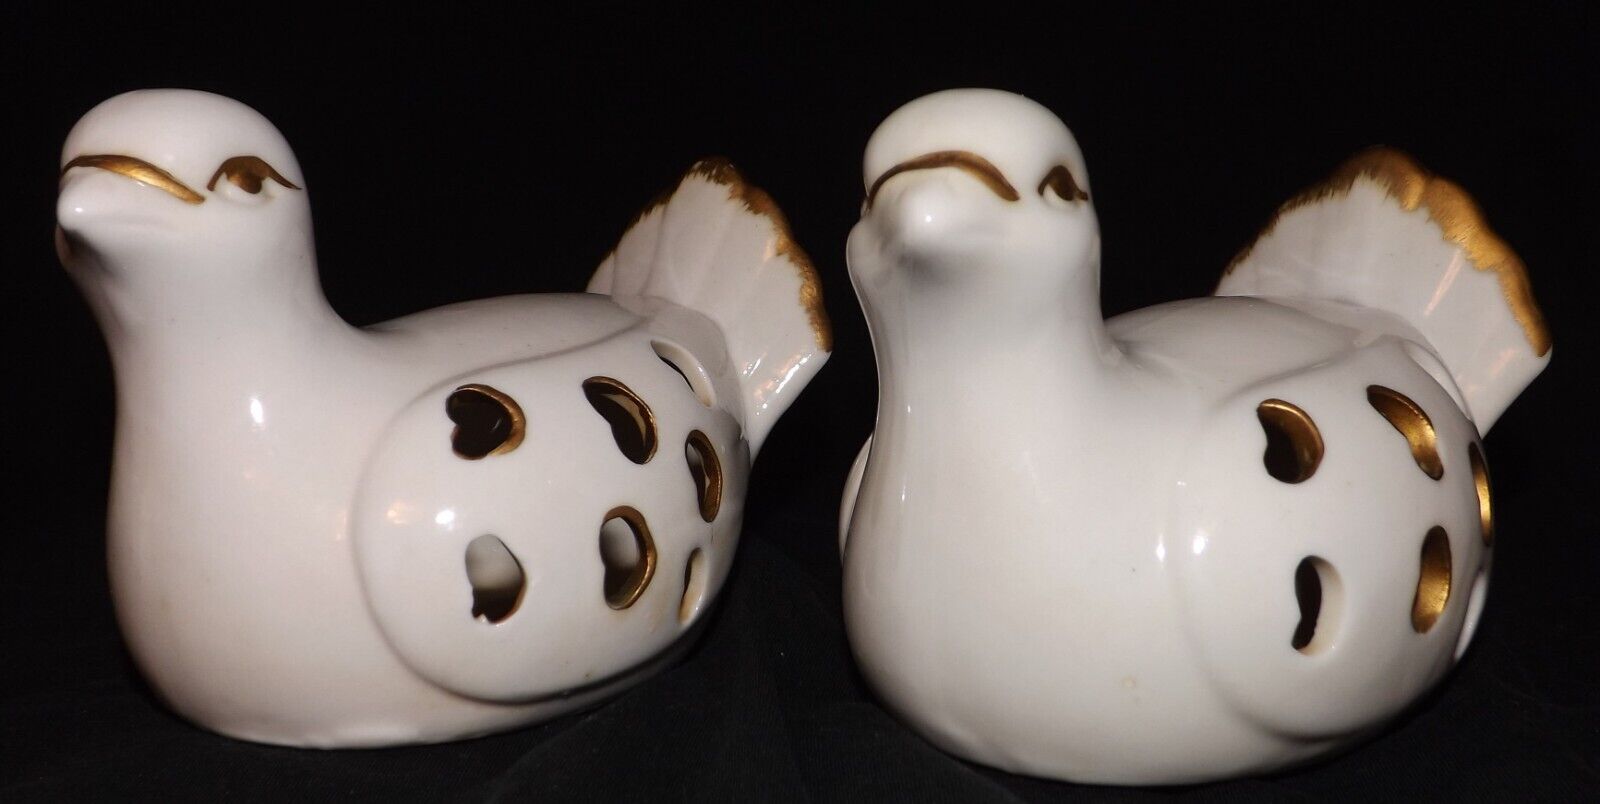 Porcelain dove figurines. Small white with gold accent hearts on the side. 